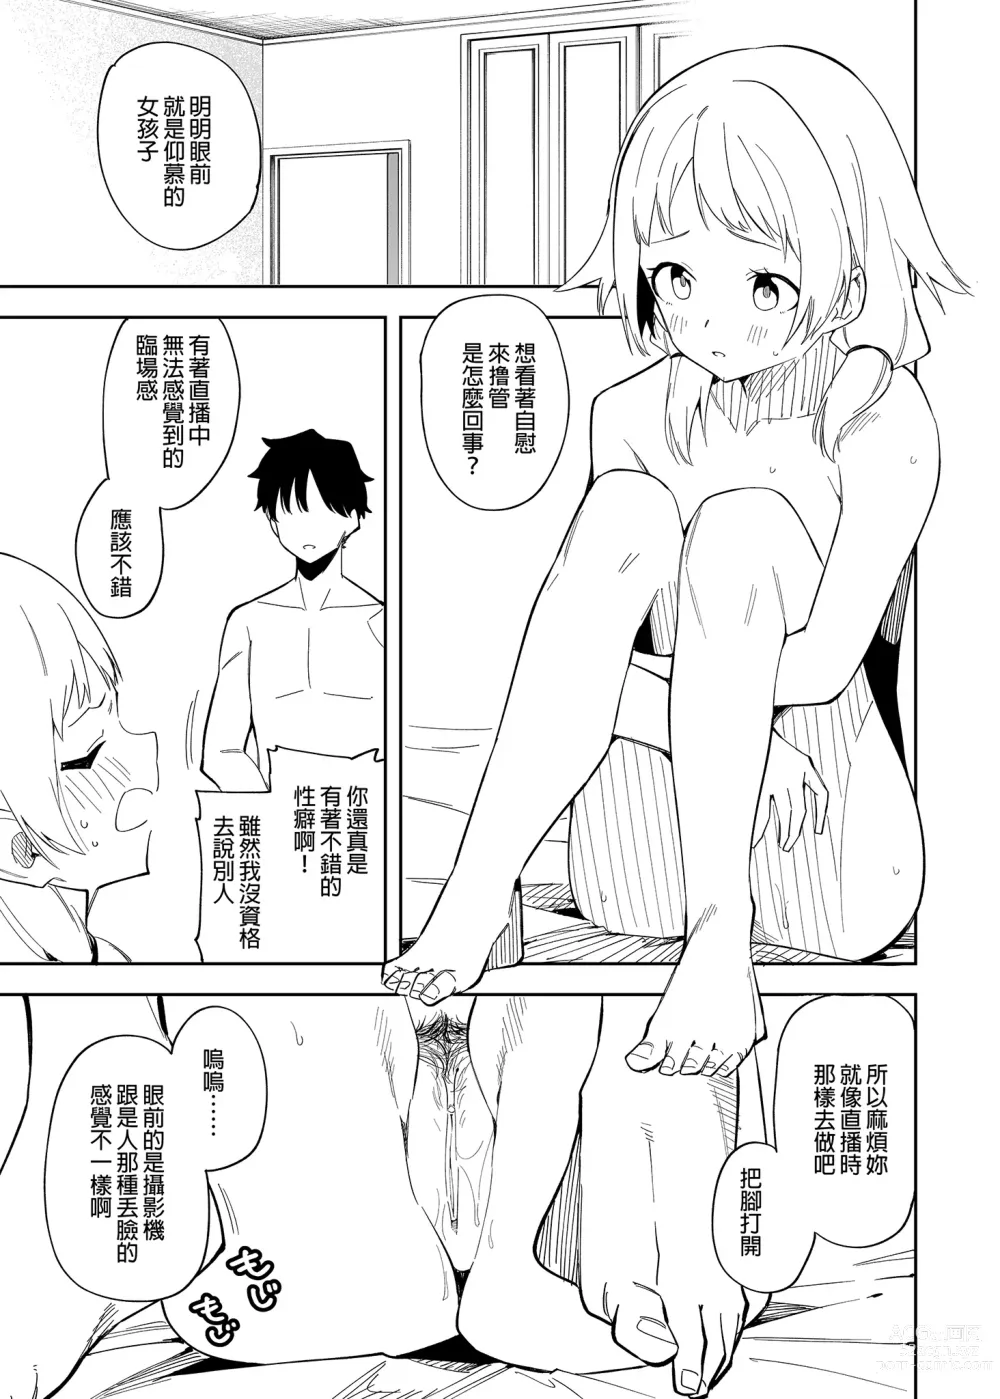 Page 31 of doujinshi 隣人は有名配信者